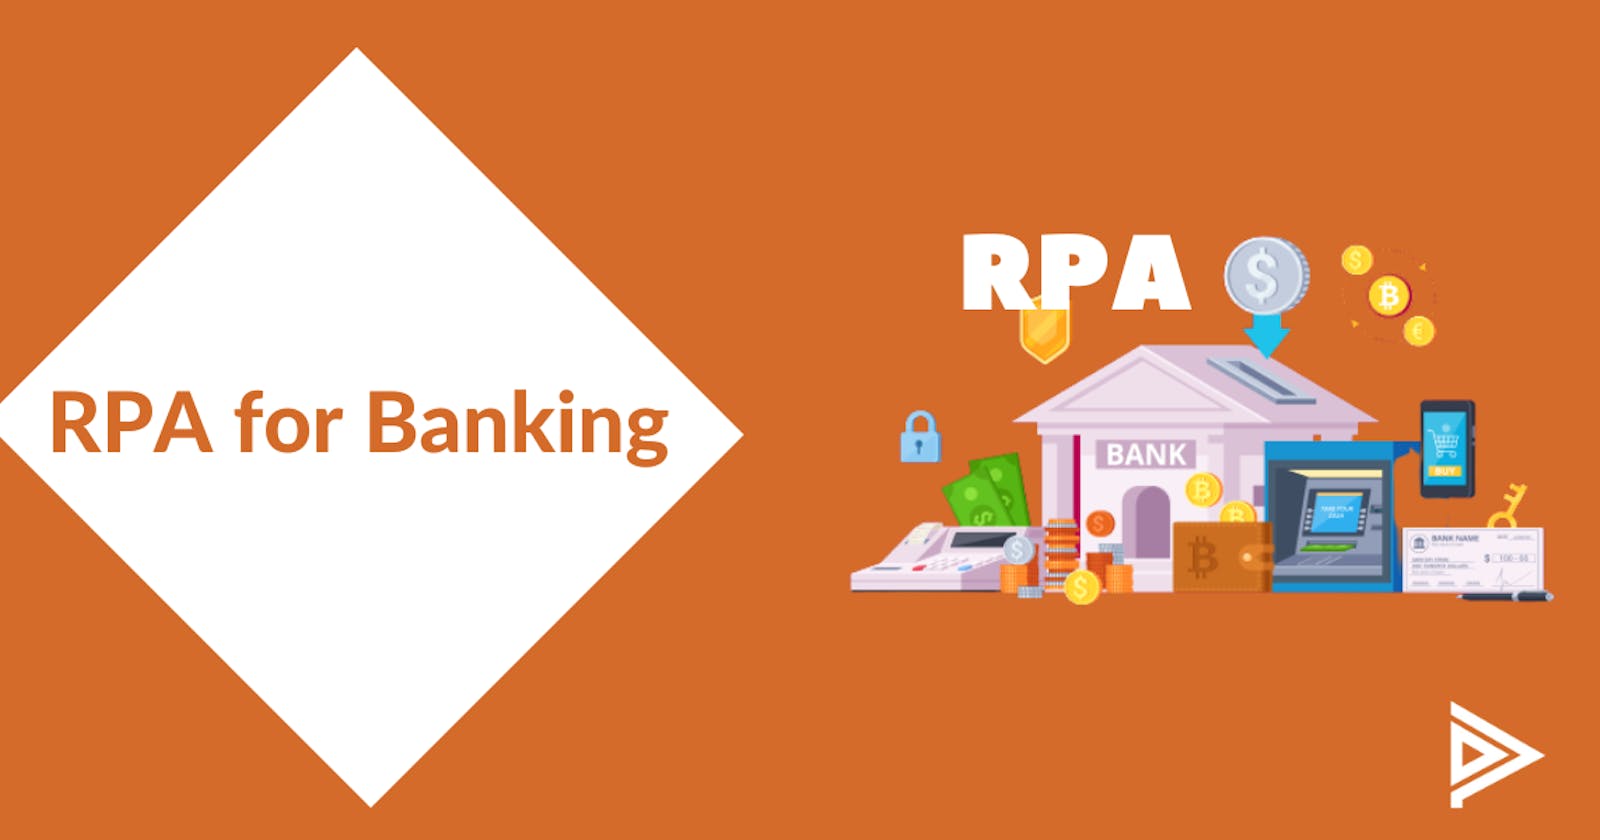 How Banks Can Automate their Processes Using RPA